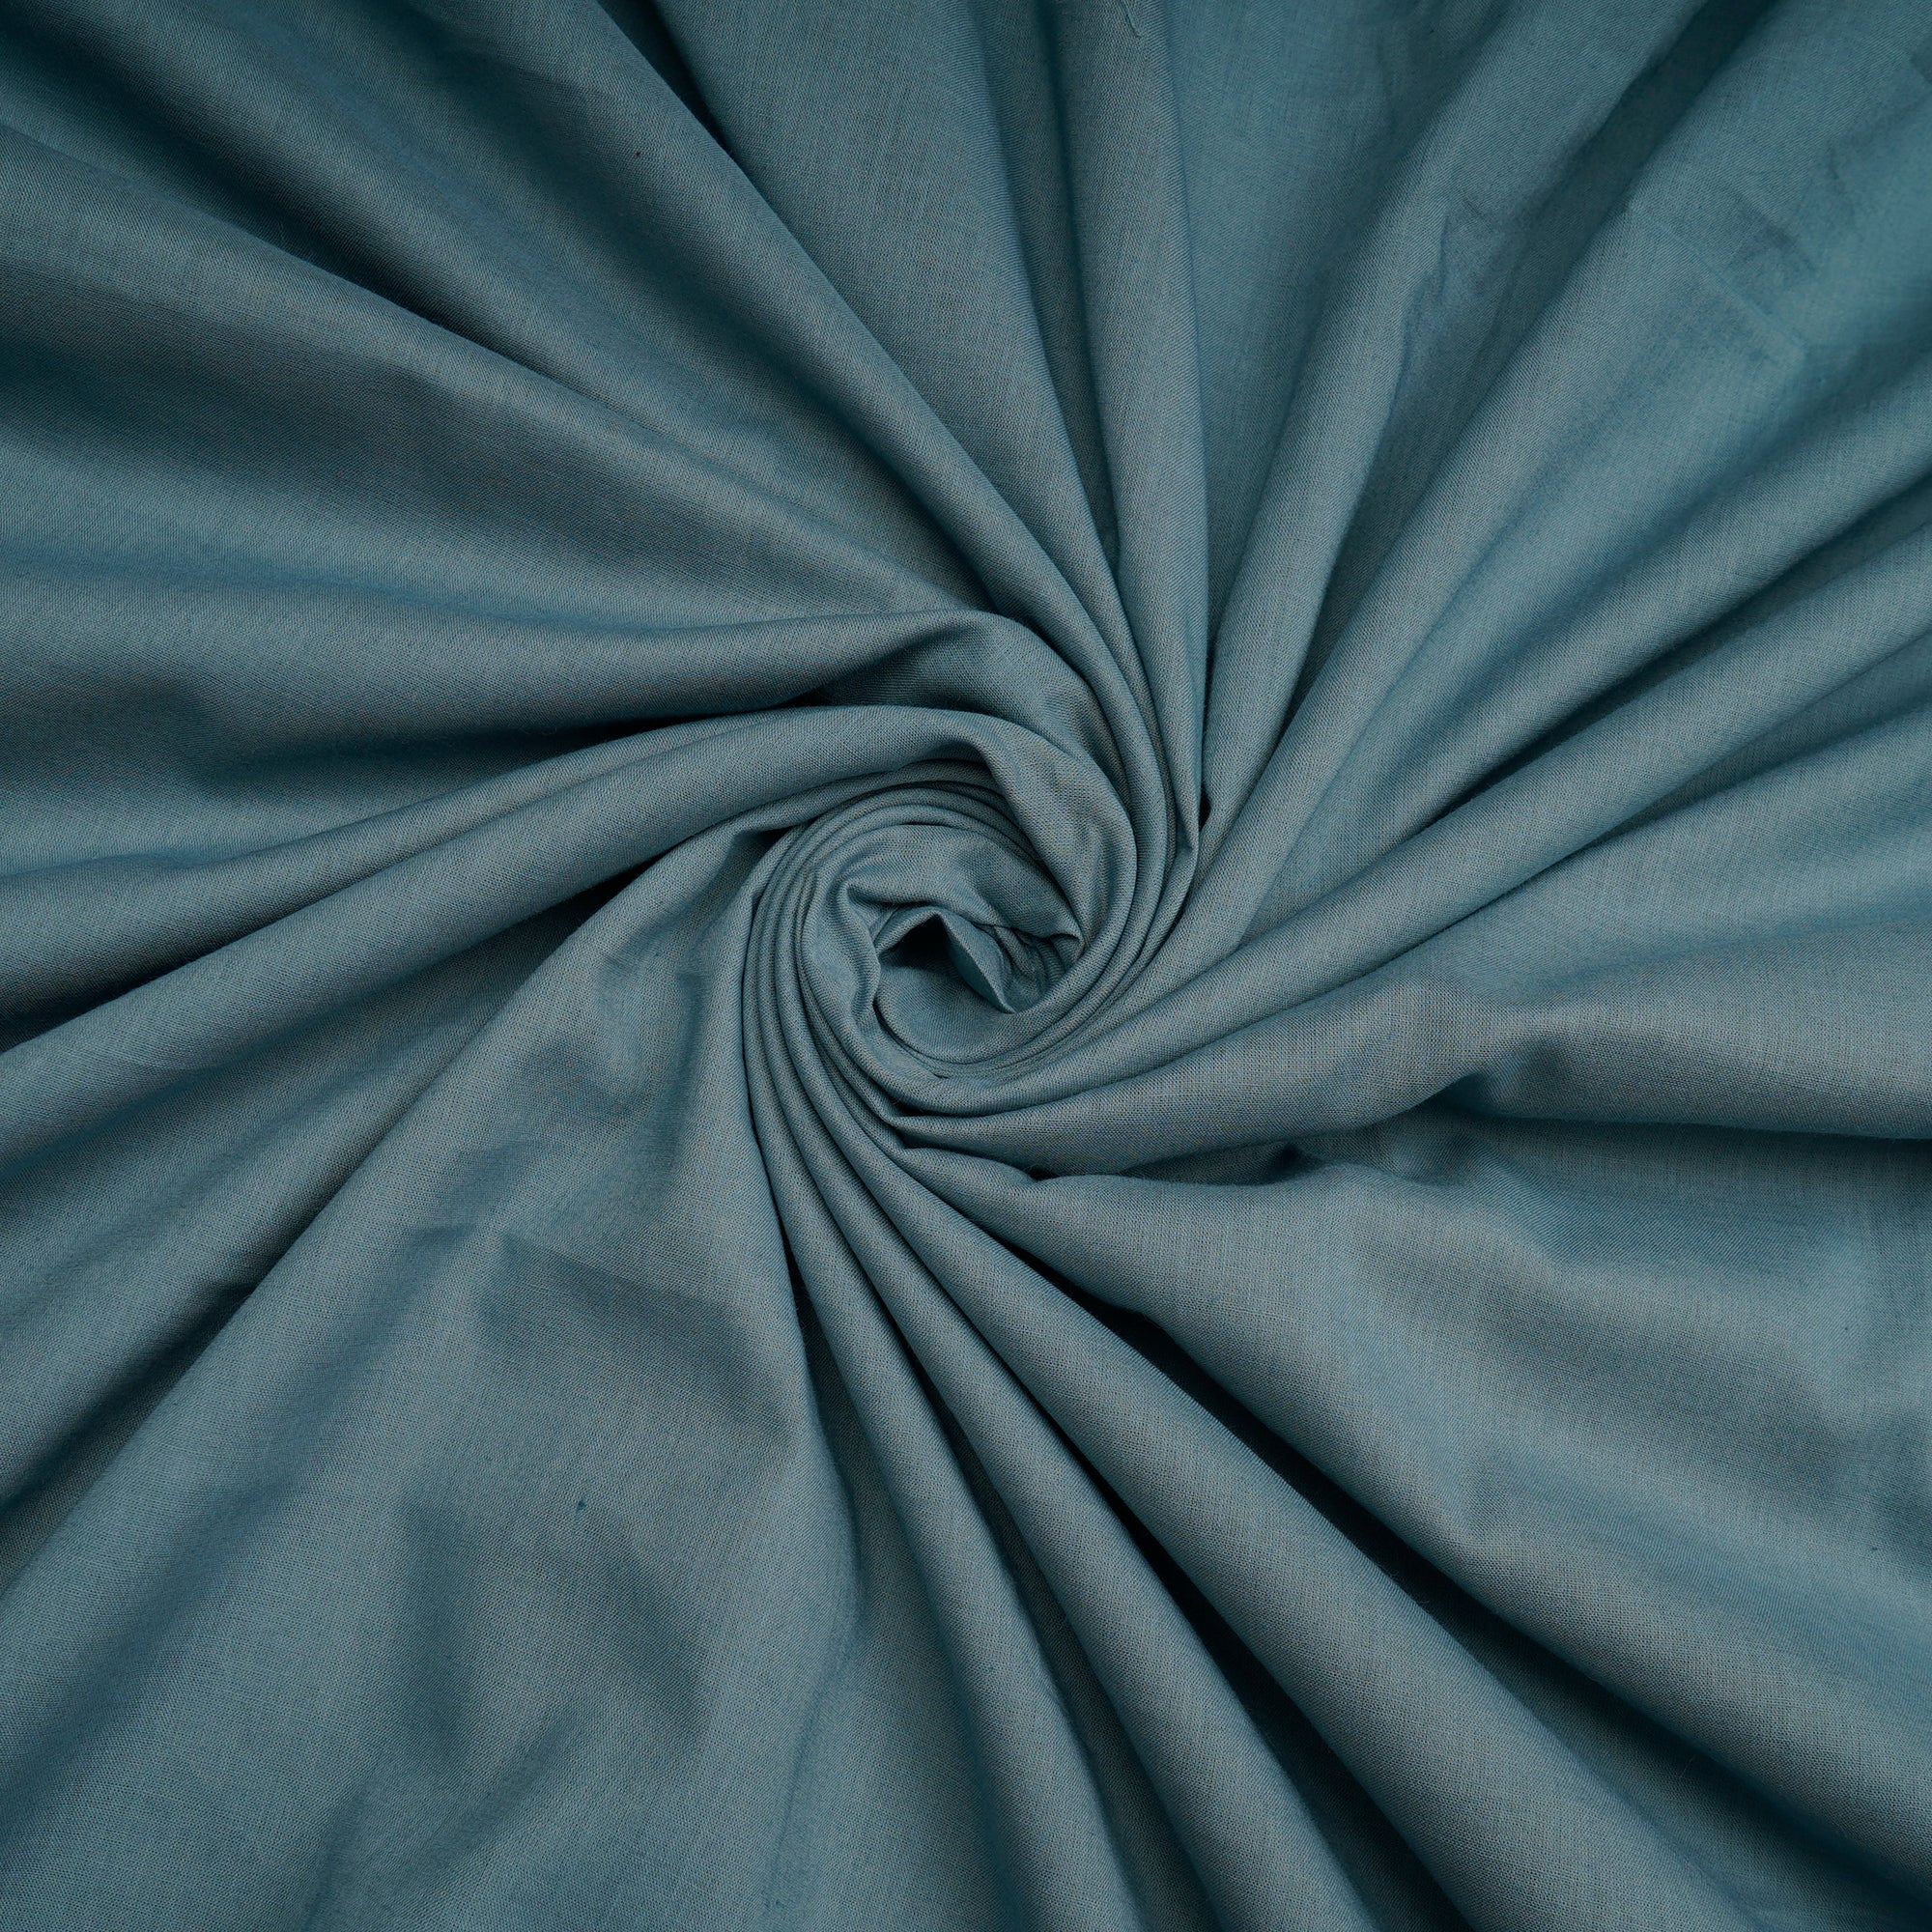 Slate Dyed Voile Cotton Fabric